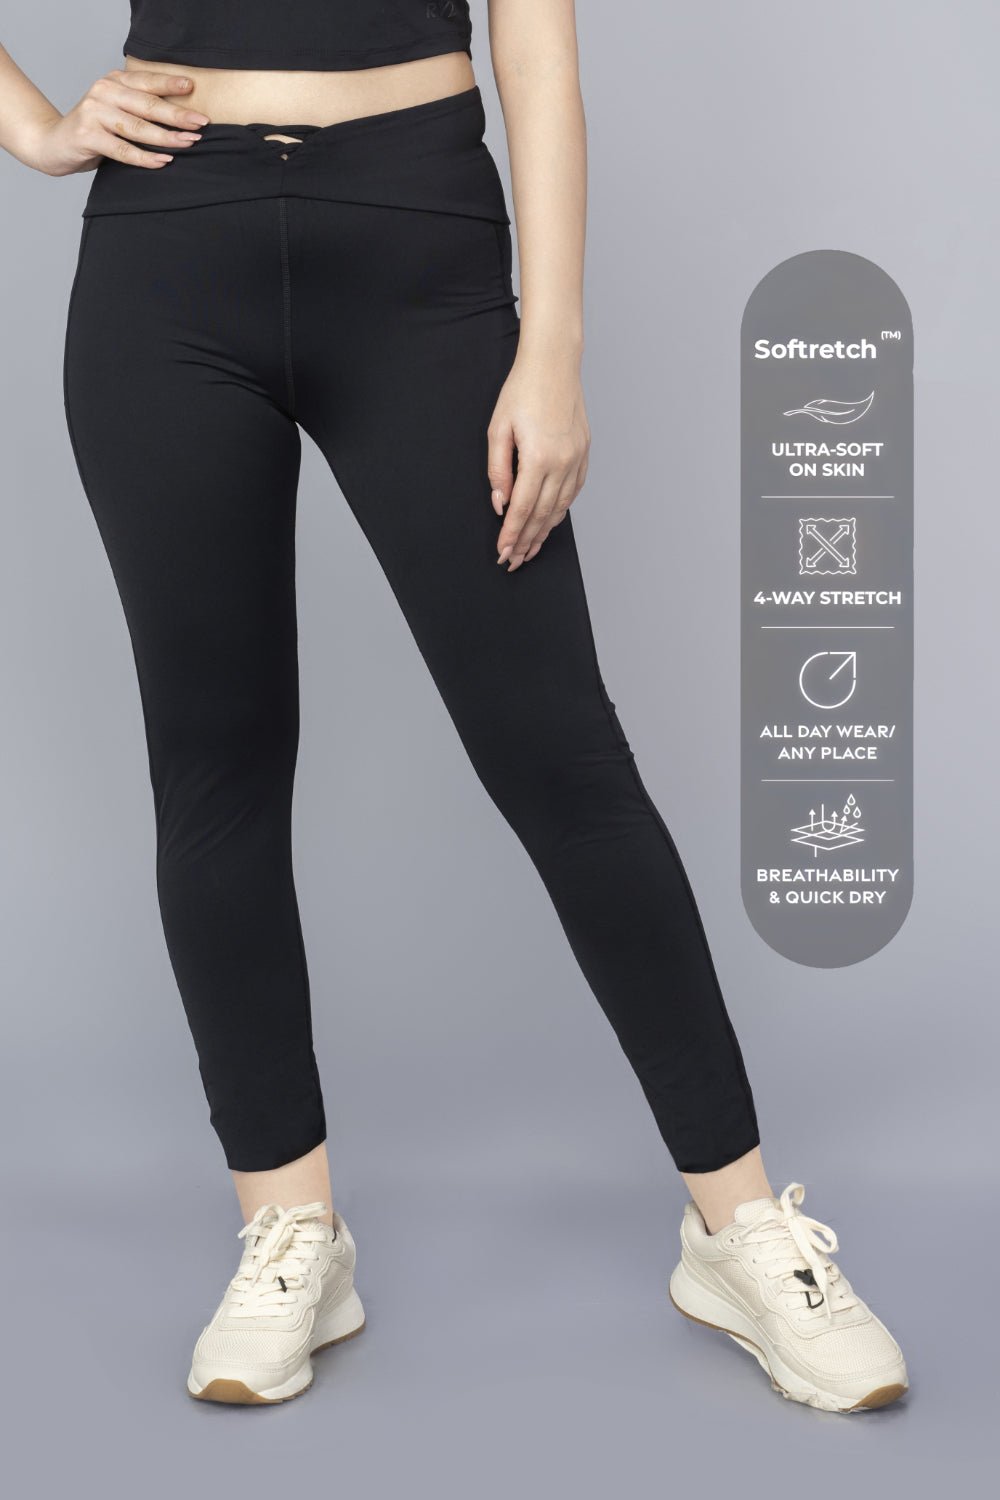 When You Wear Leggings Every Day, This Is What Happens To Your Body